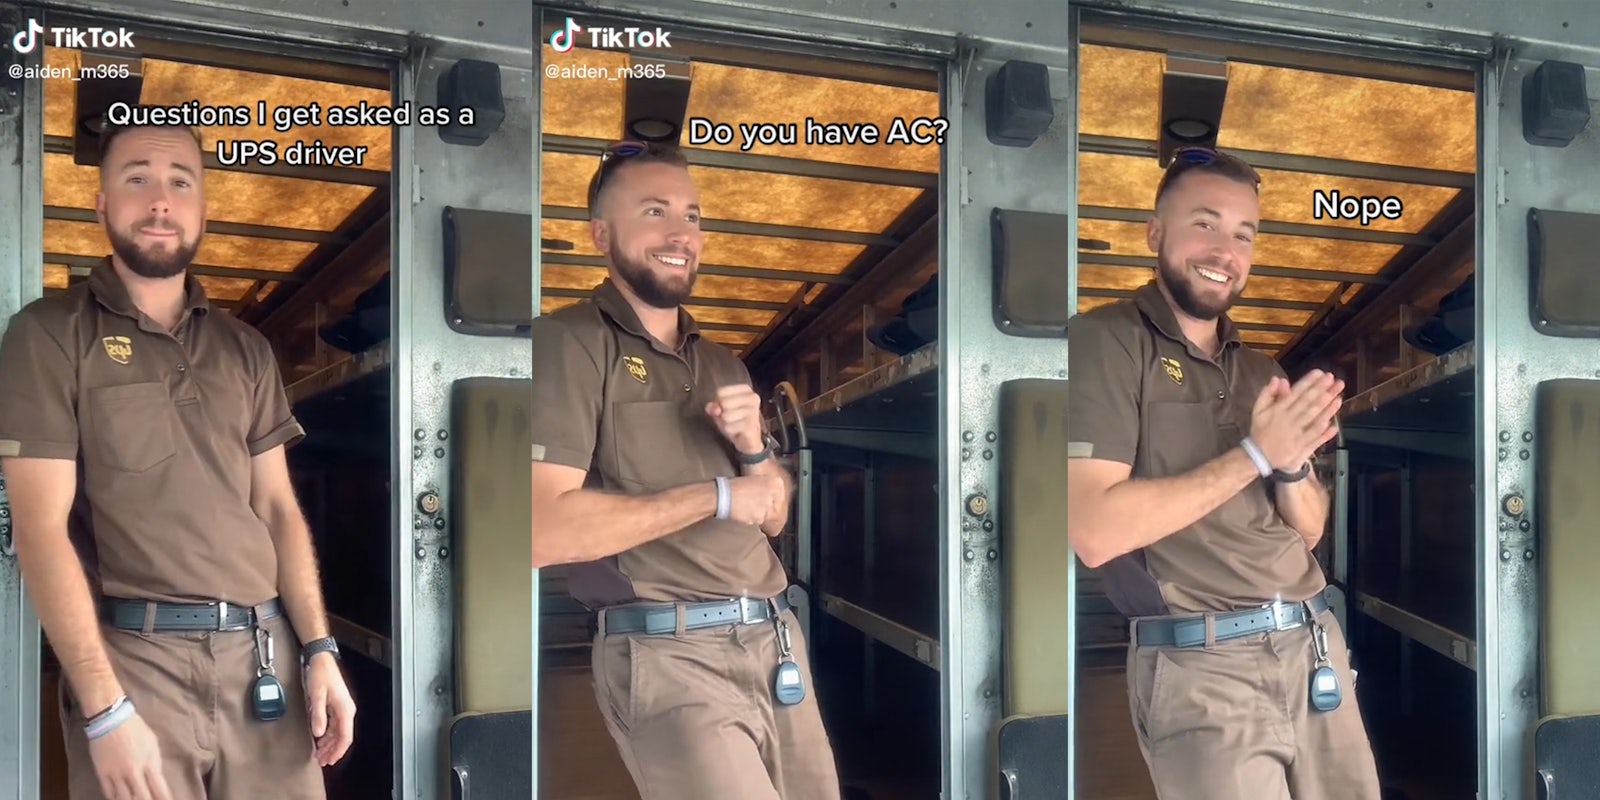 UPS driver with captions 'Questions I get asked as a UPS driver' (l) 'Do you have AC?' (c) 'Nope' (r)